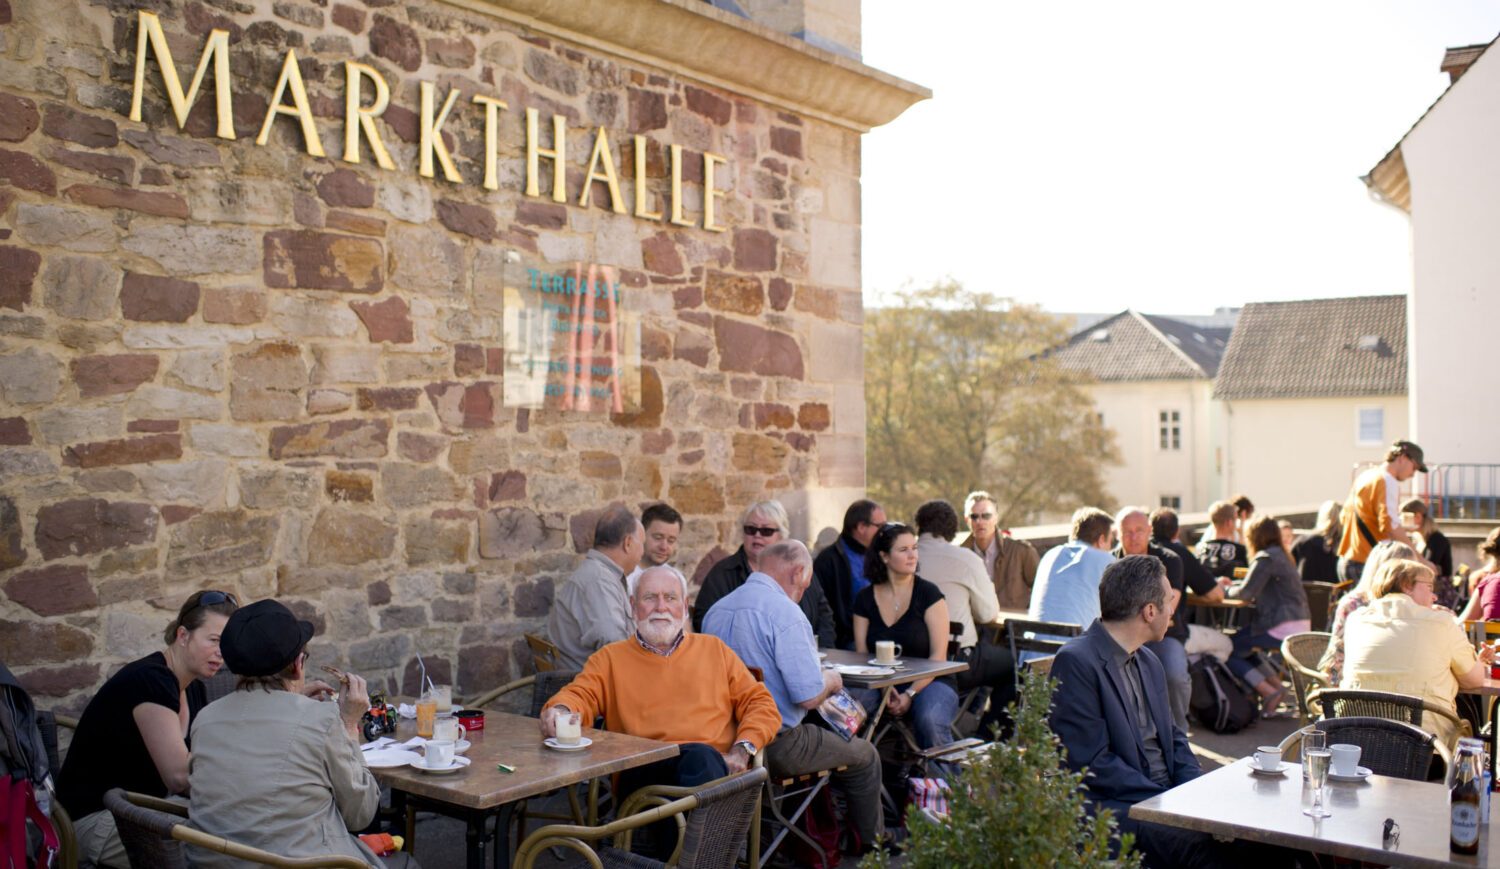 The historic market hall offers many delicacies - and a café with a view of the beautiful Karlsaue © Kassel Marketing GmbH | Photographer Paavo Blåfield